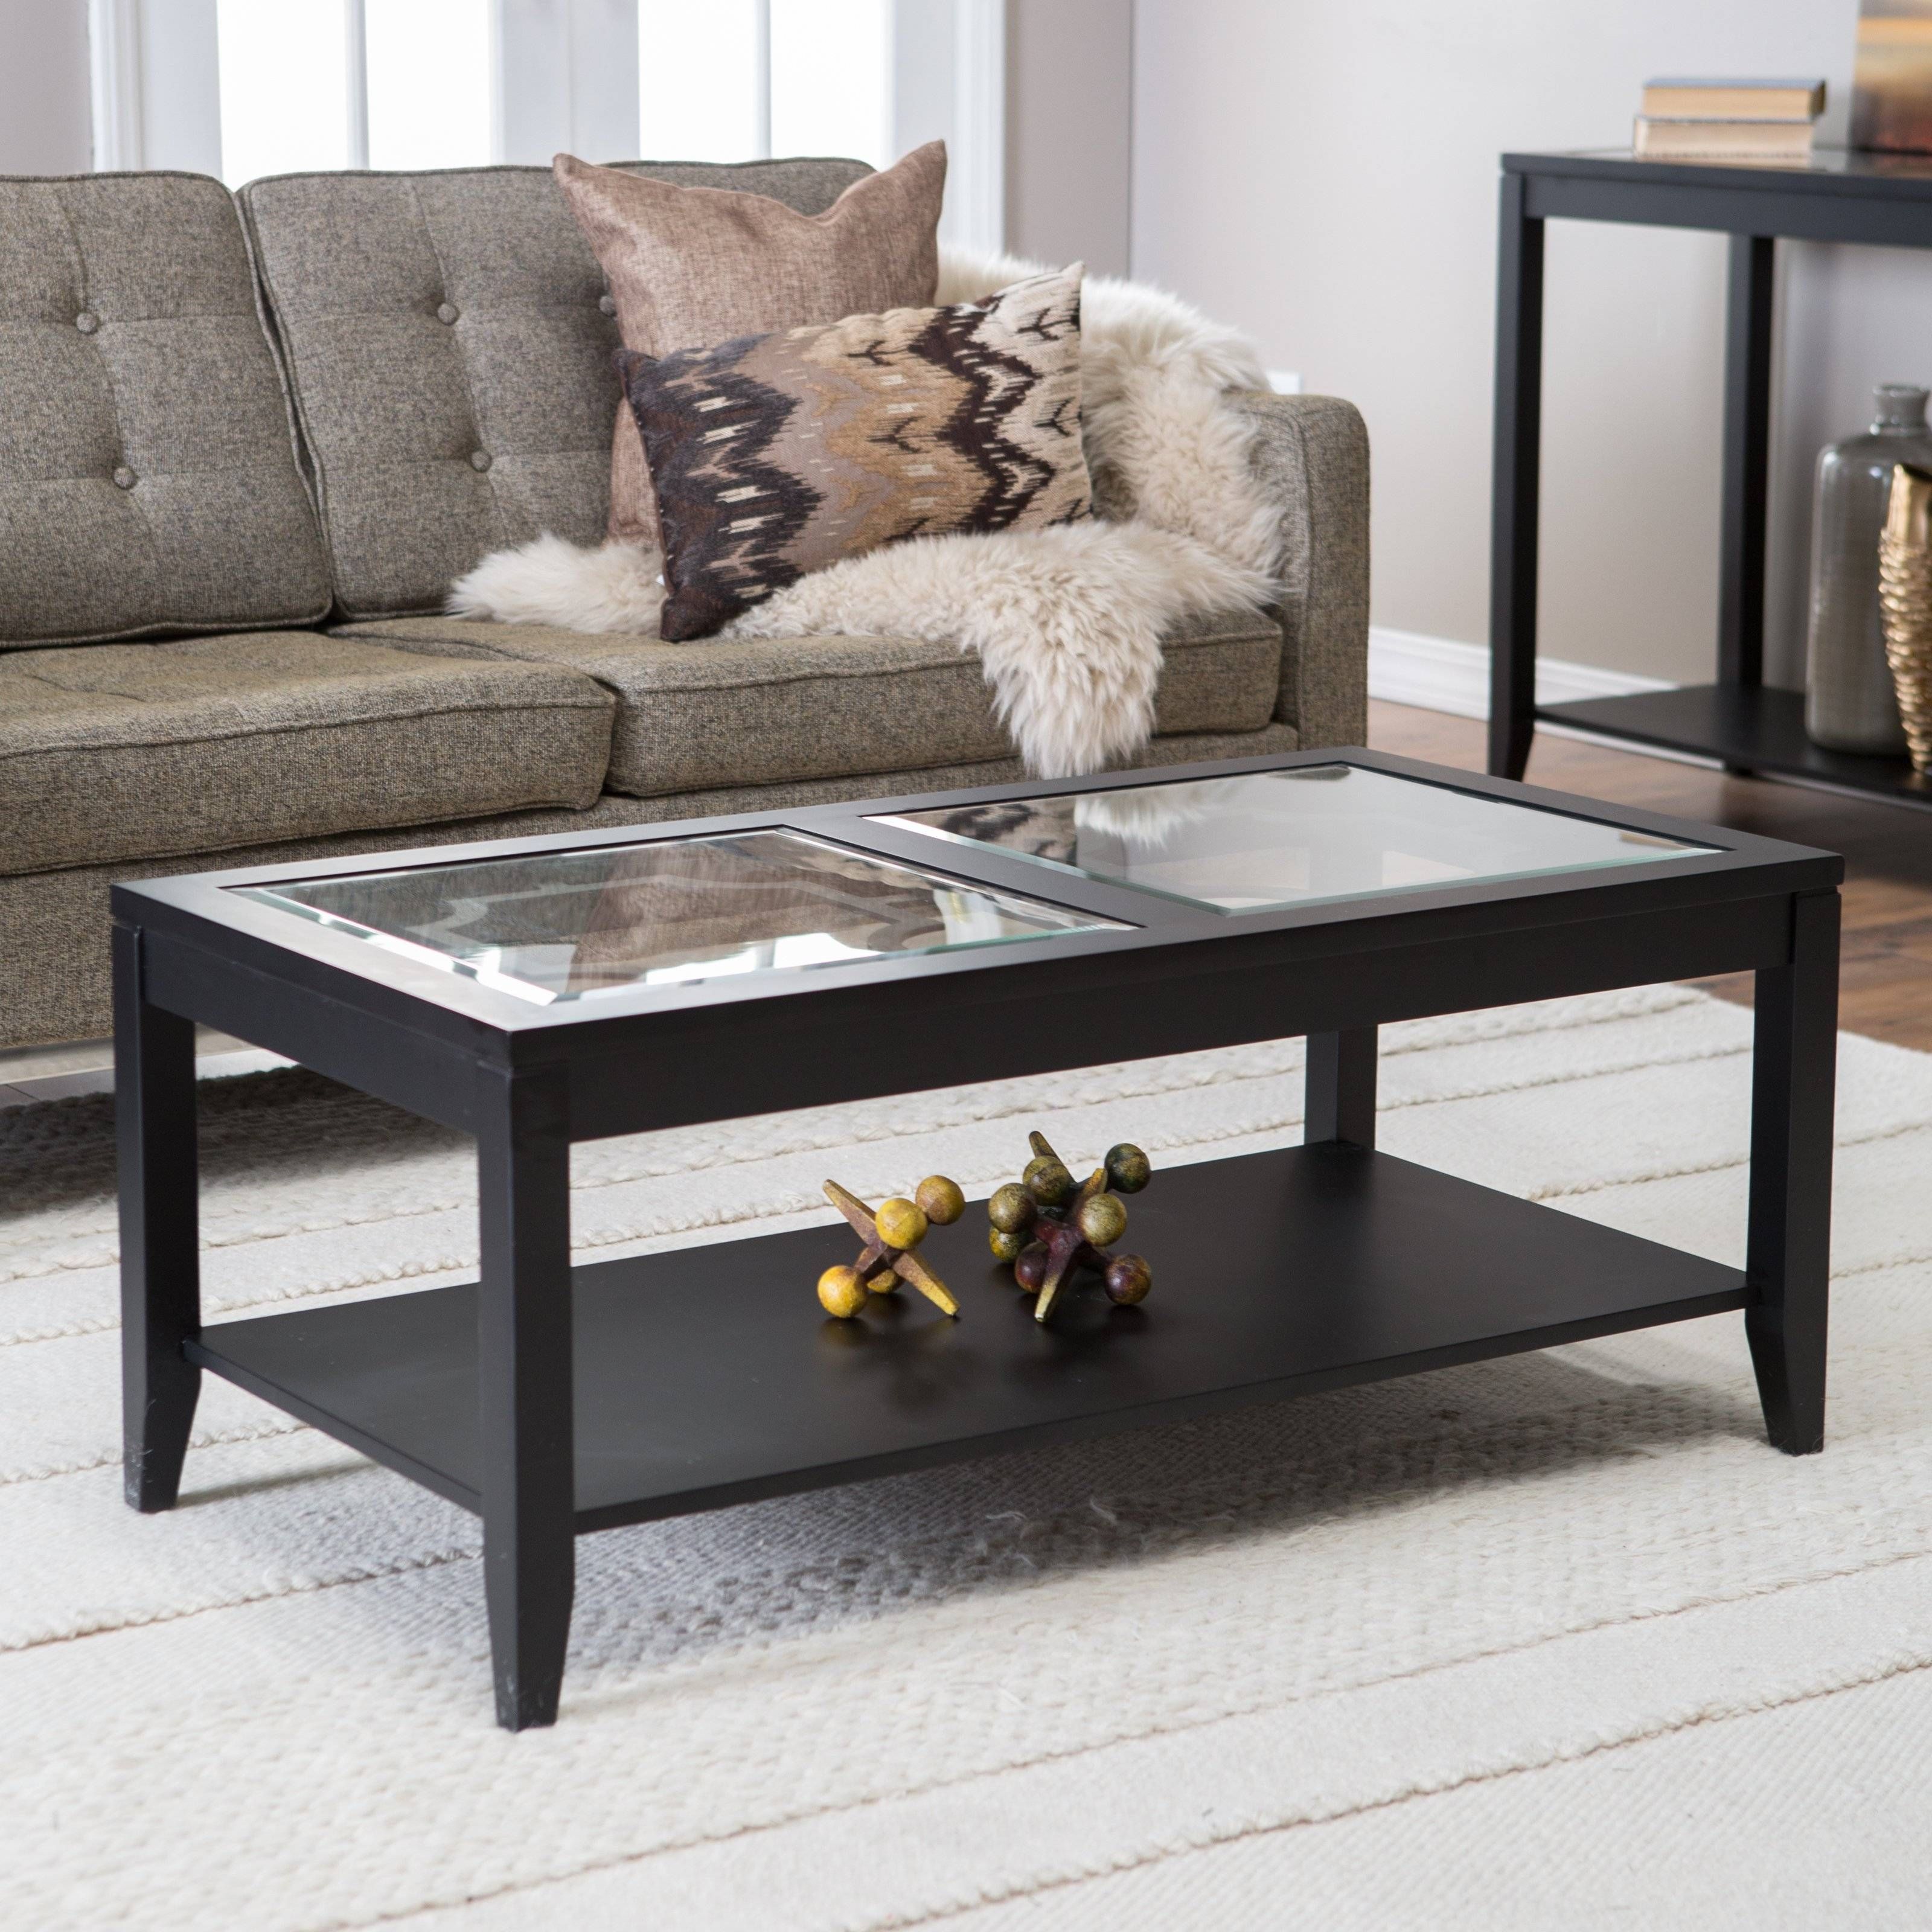 Coffee Table: Latest Coffee Table With Glass Top Design Ideas In Dark Wood Coffee Tables With Glass Top (View 2 of 30)